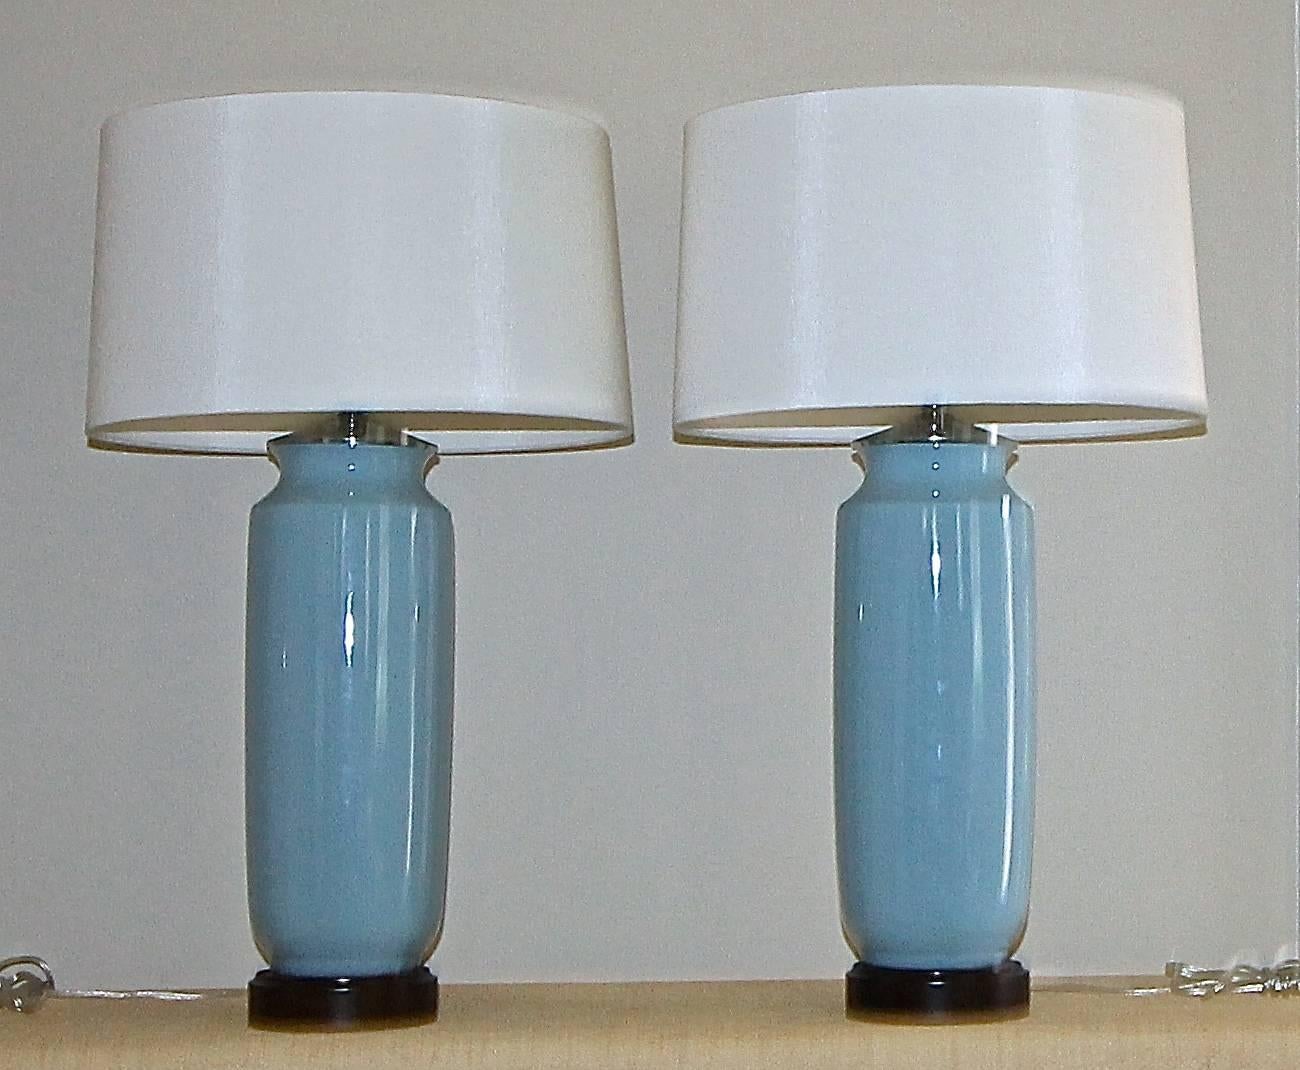 Pair of high end custom pale blue ceramic lamps on turned wood bases in dark brown finish. Nickel finish fittings and newly wired with full range dimmer sockets. White fabric shades are included. Overall height including shades 28", height